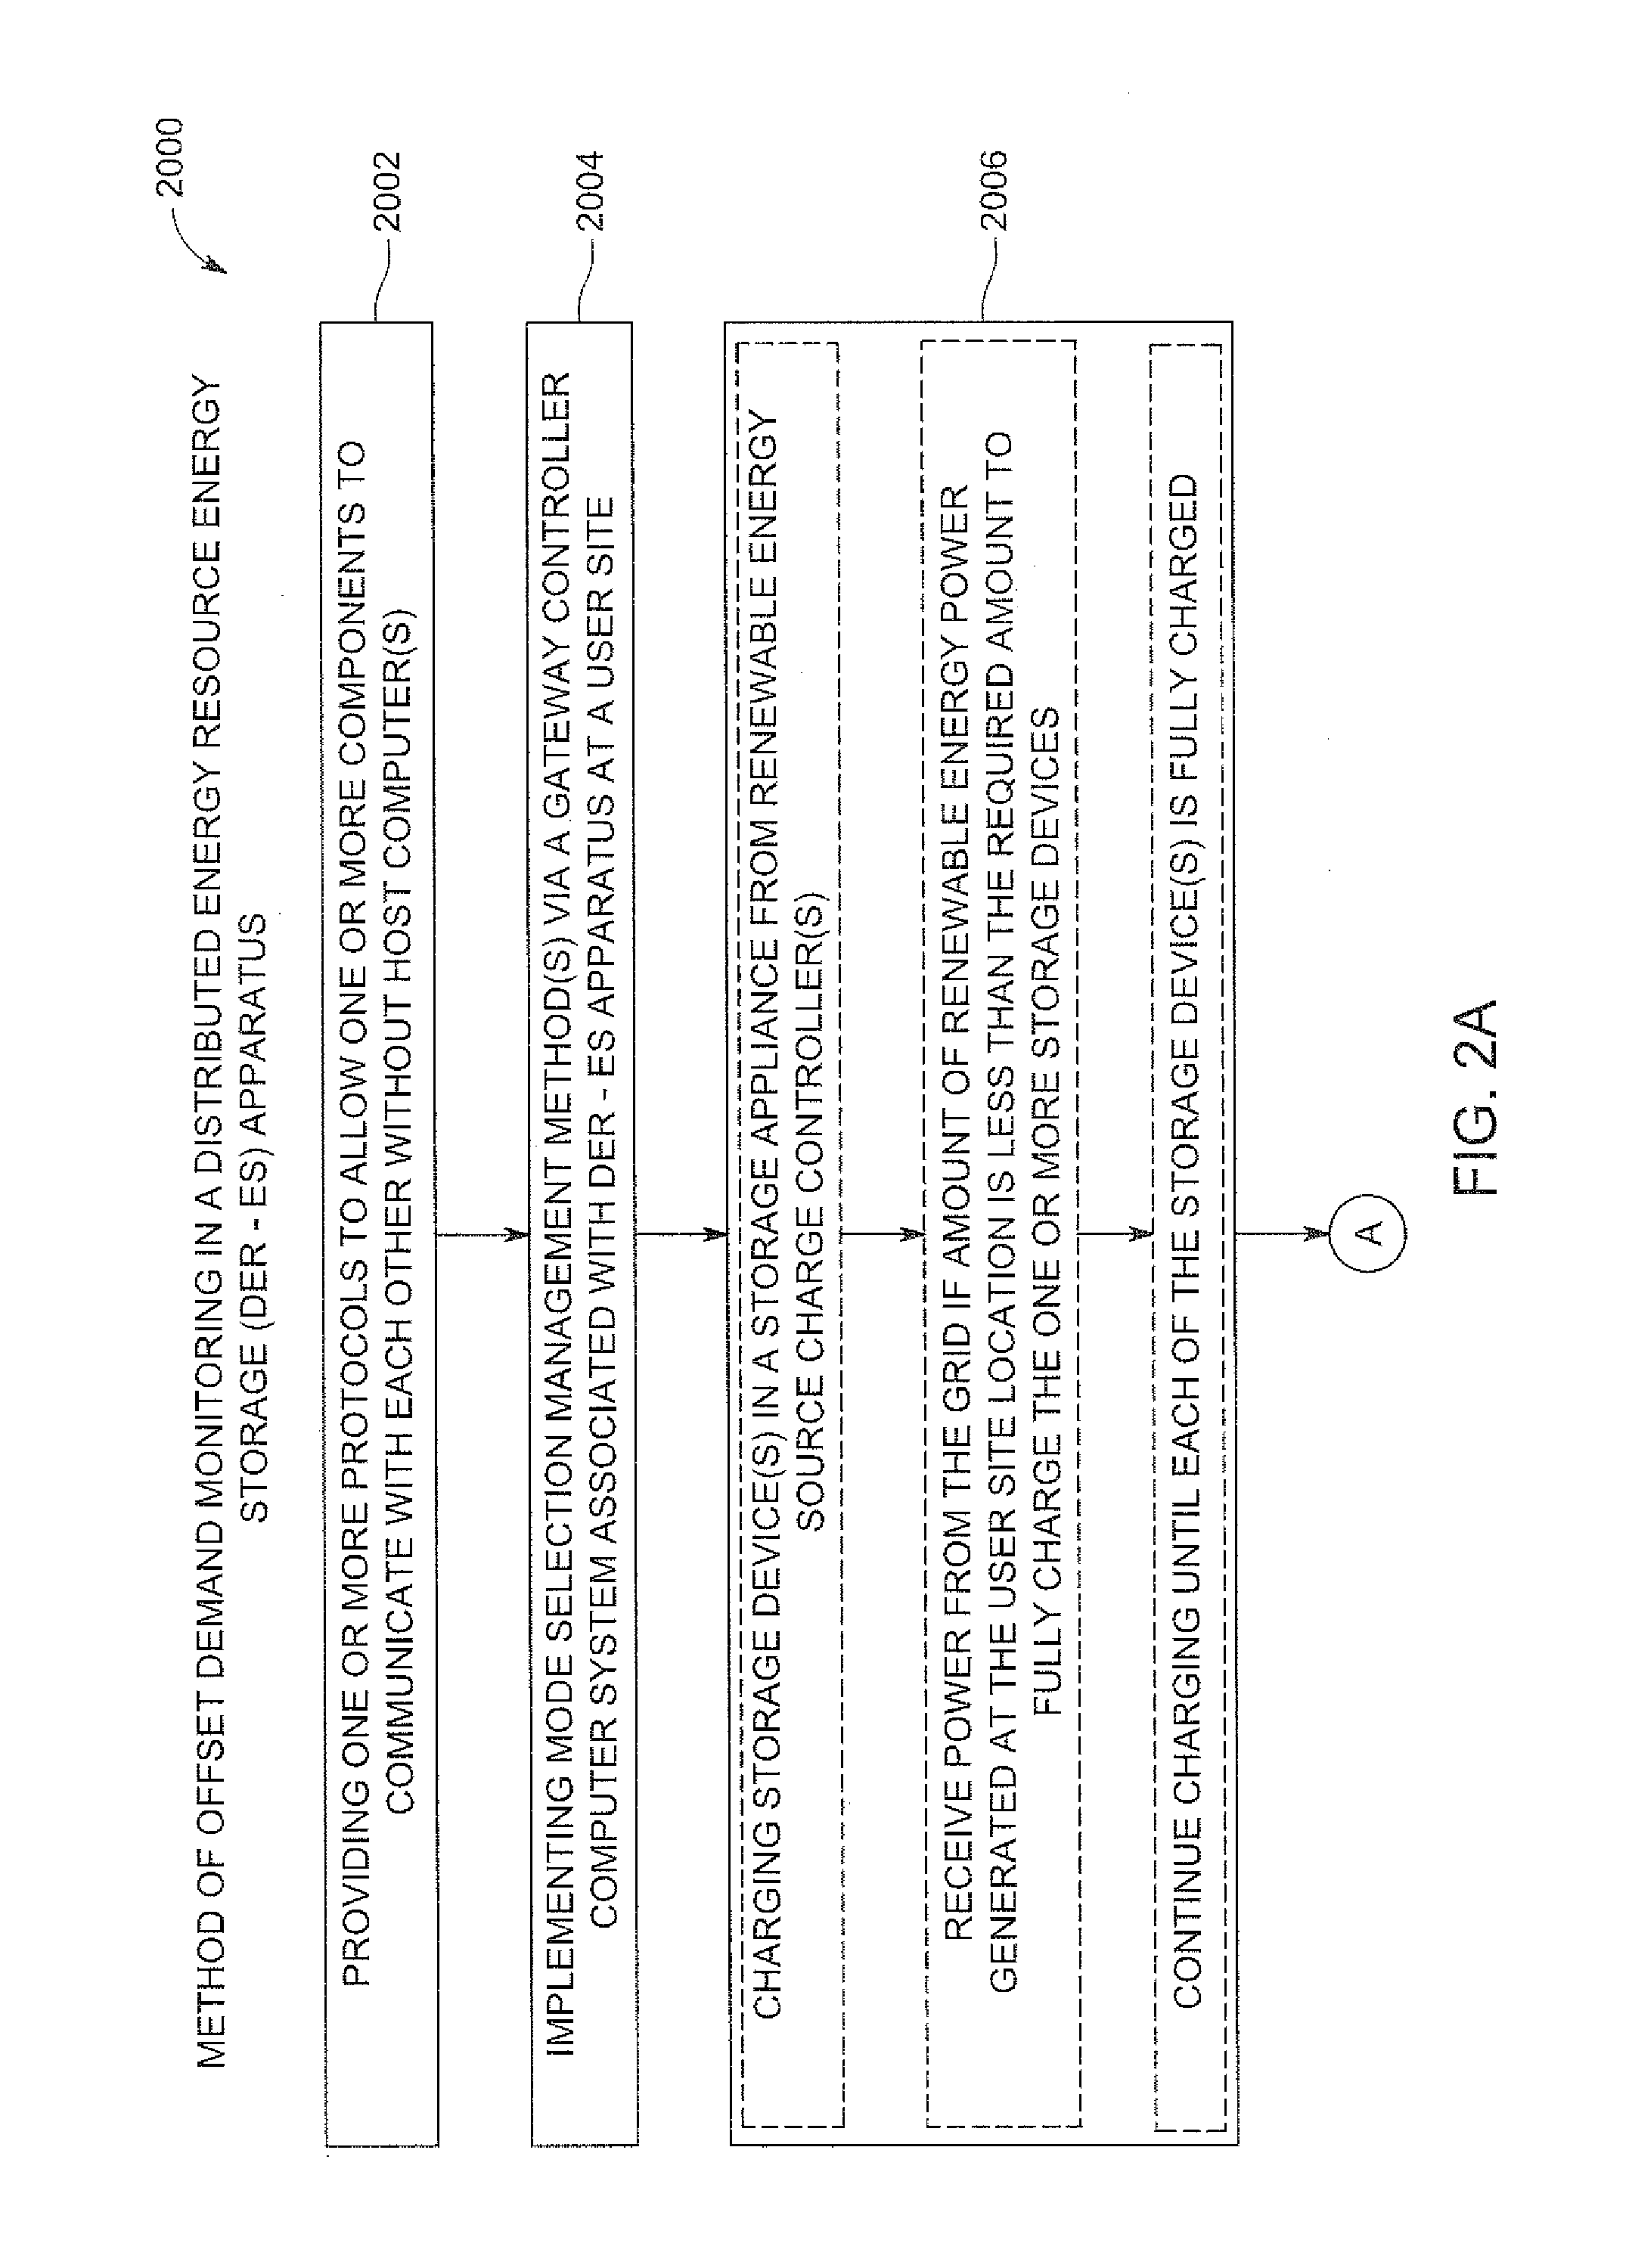 Renewable energy integrated storage and generation systems, apparatus, and methods with cloud distributed energy management services